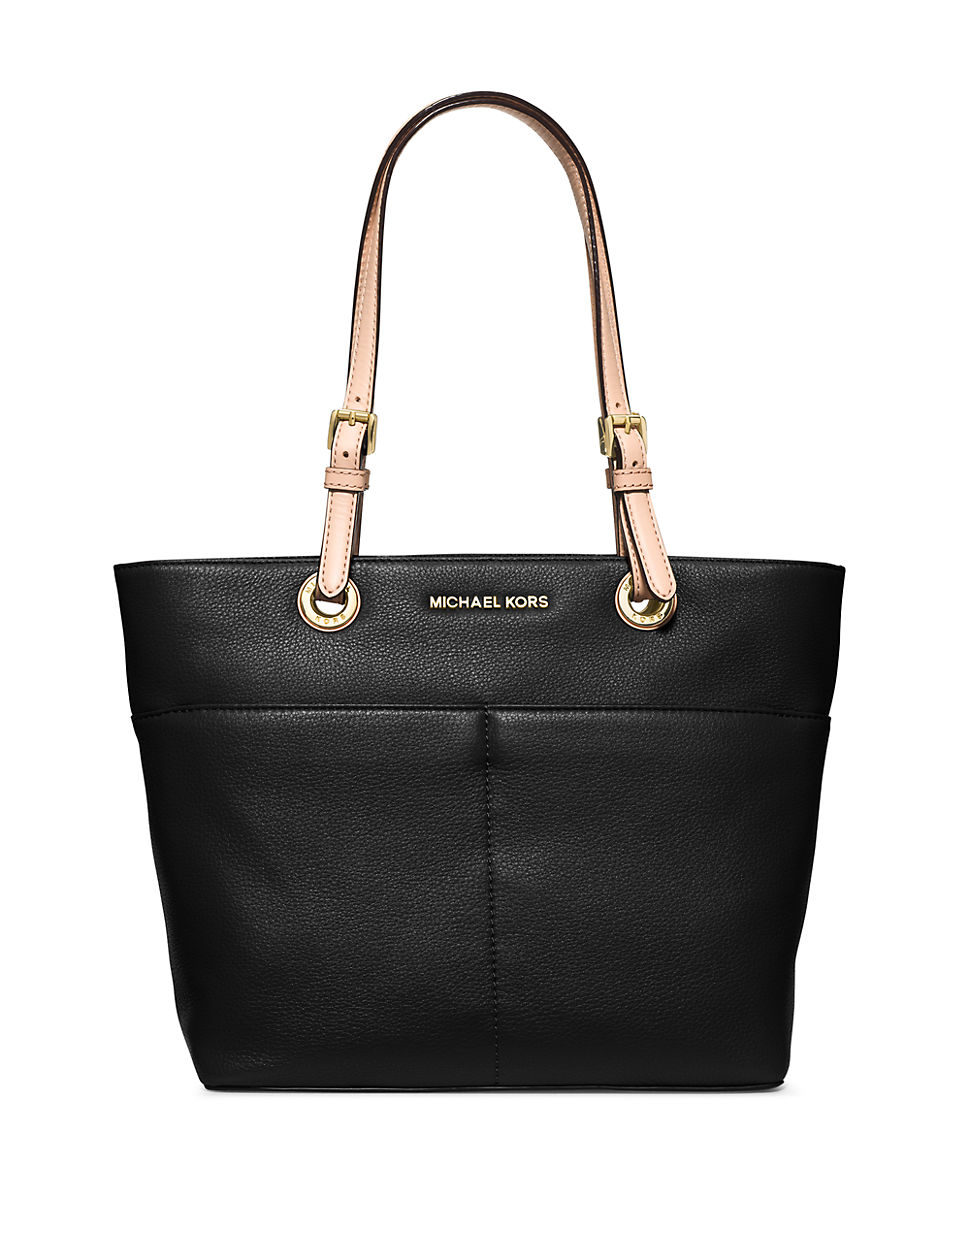 MICHAEL Michael Kors Bedford Leather Tote in Black - Lyst